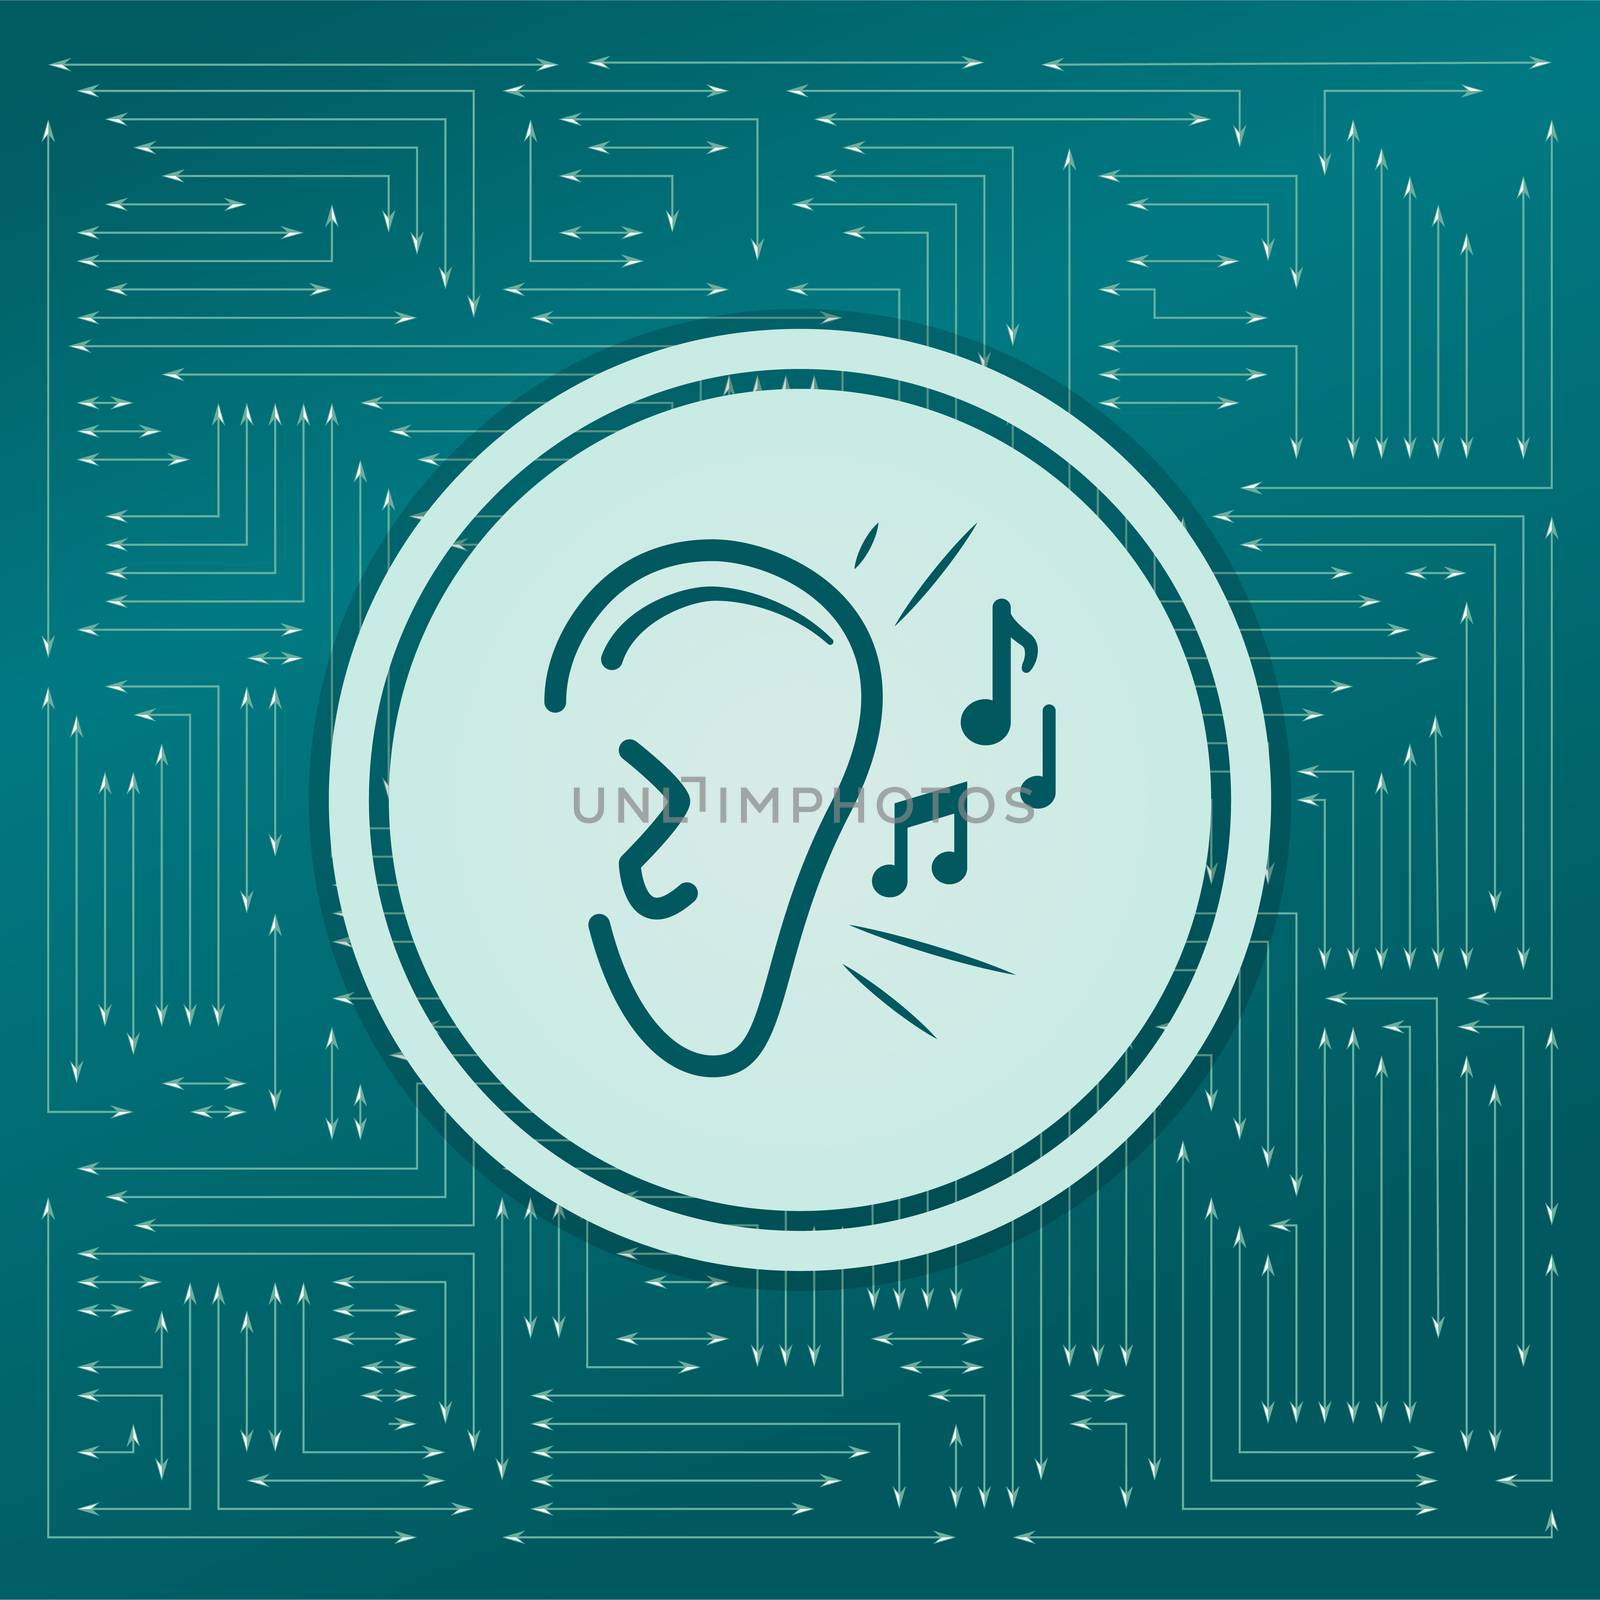 Ear listen sound signal icon on a green background, with arrows in different directions. It appears on the electronic board. illustration